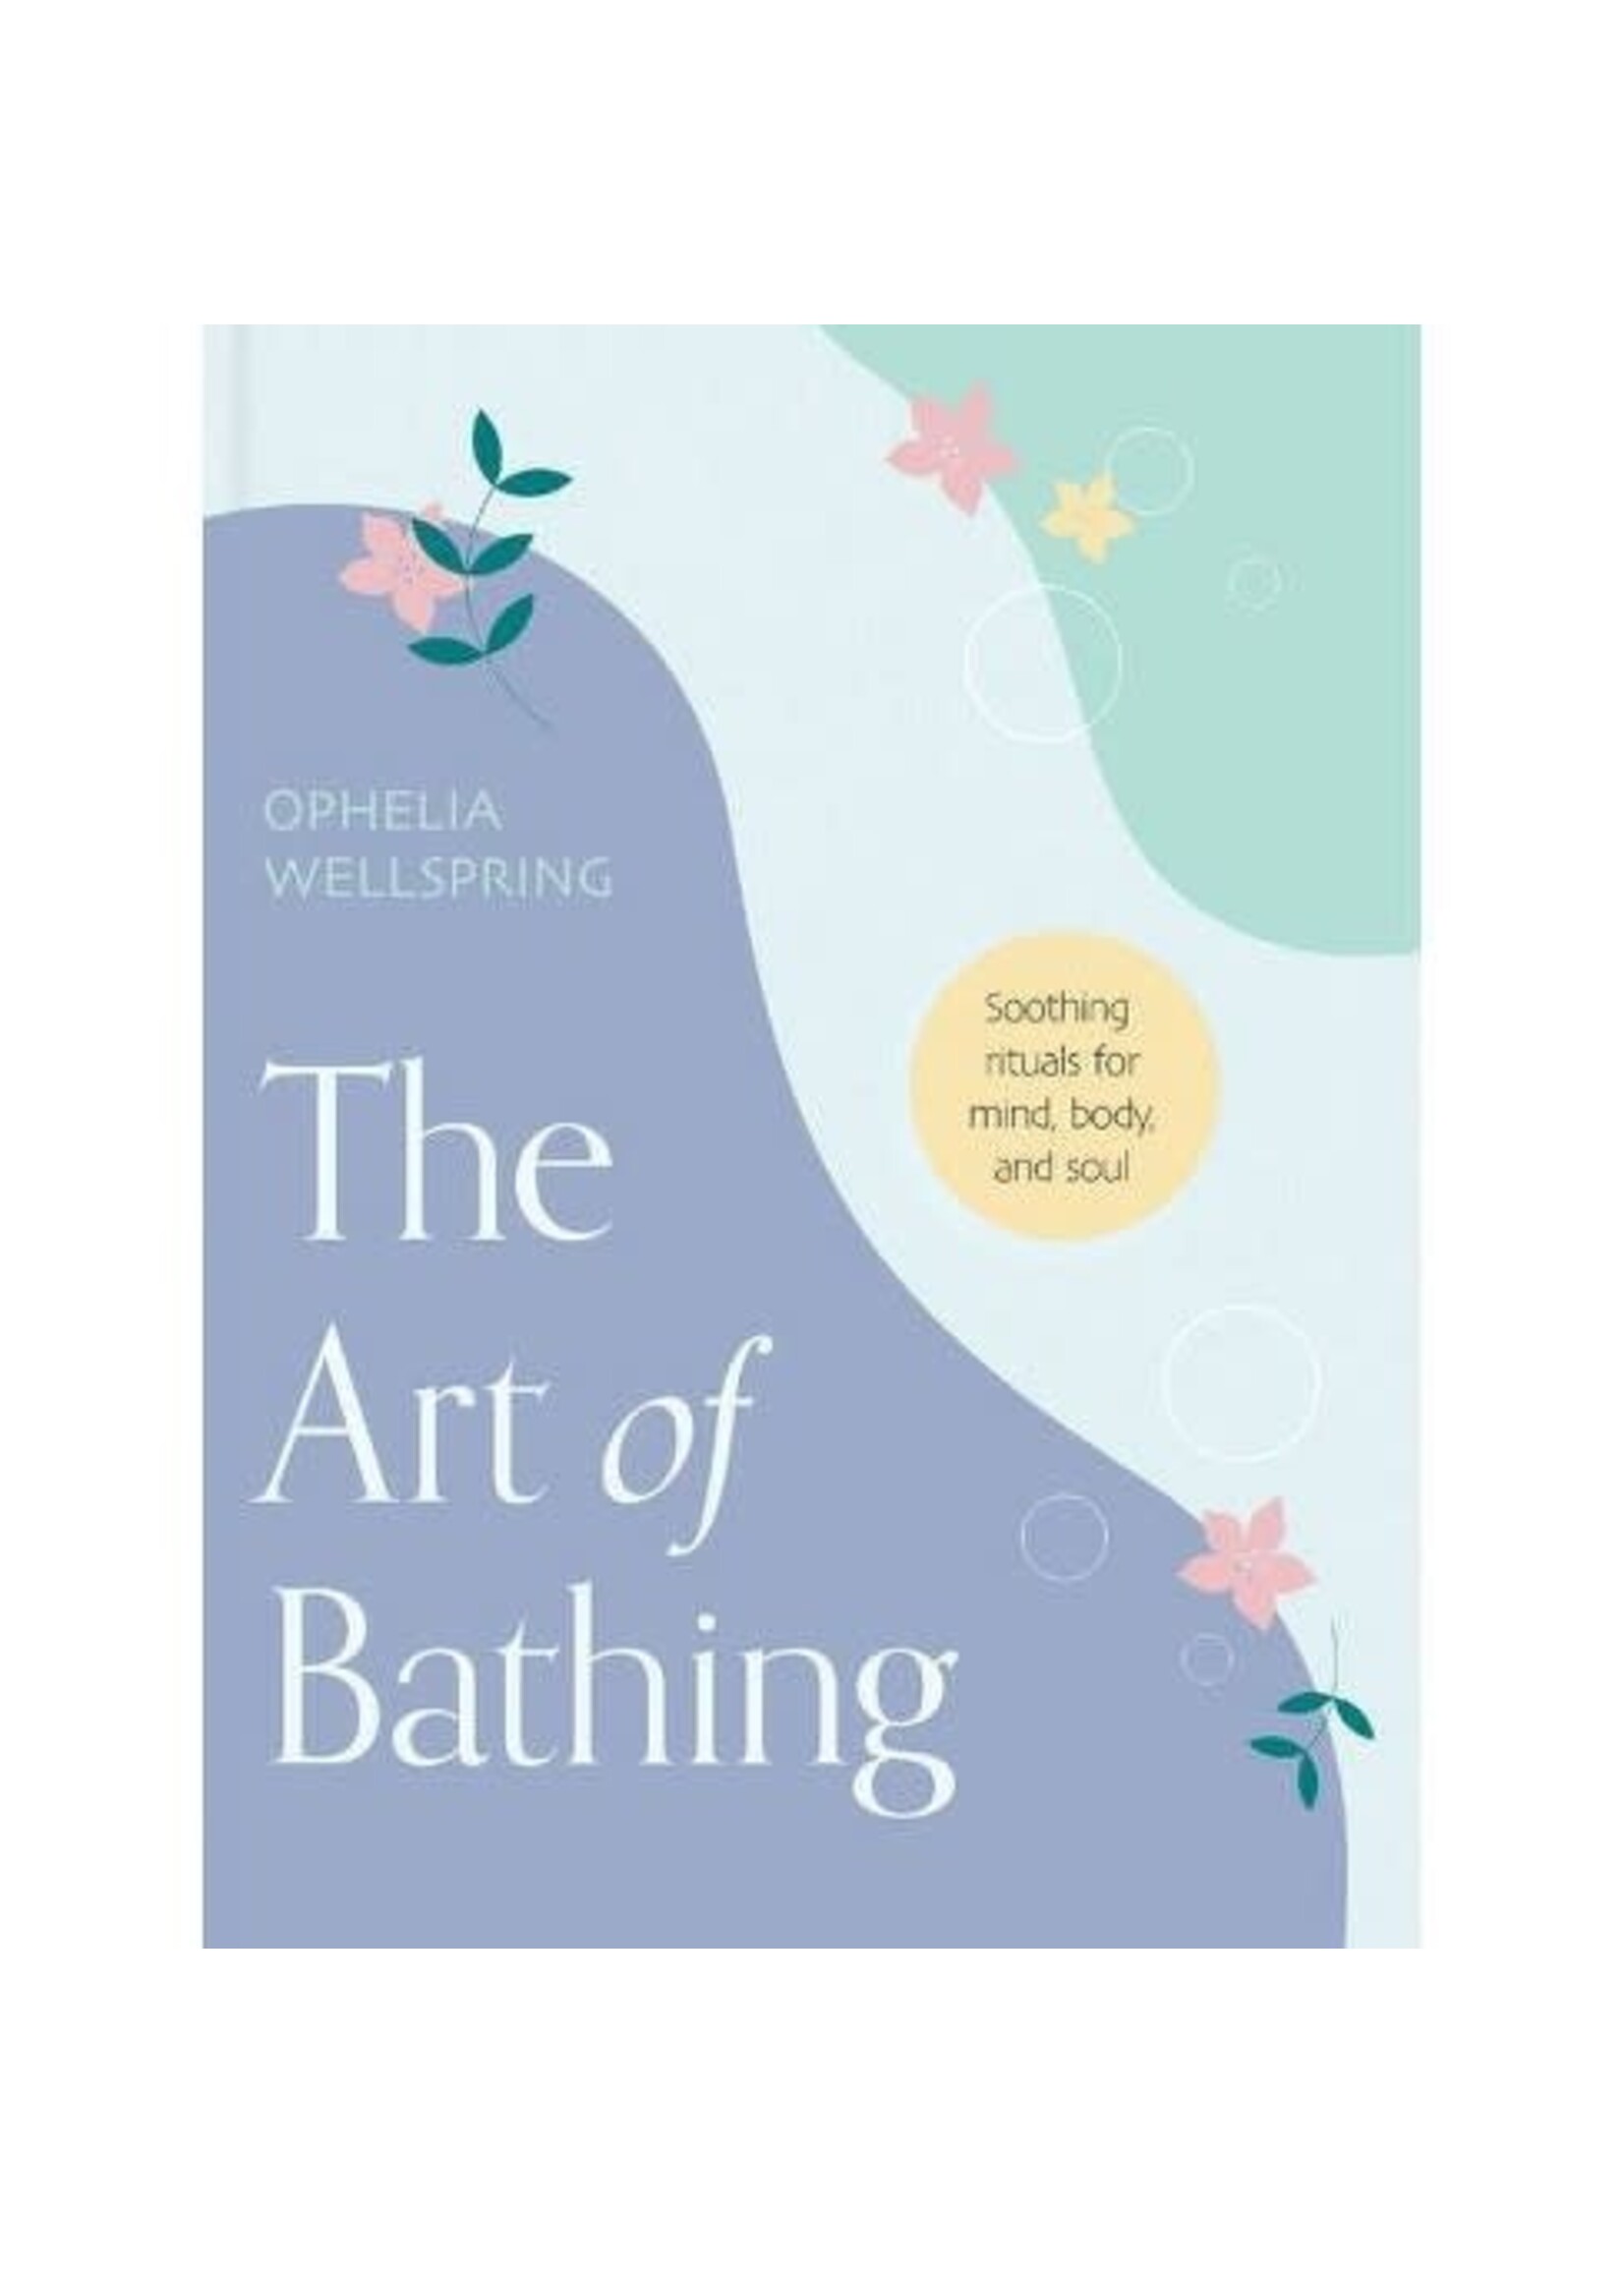 The Art of Bathing by Ophelia Wellspring